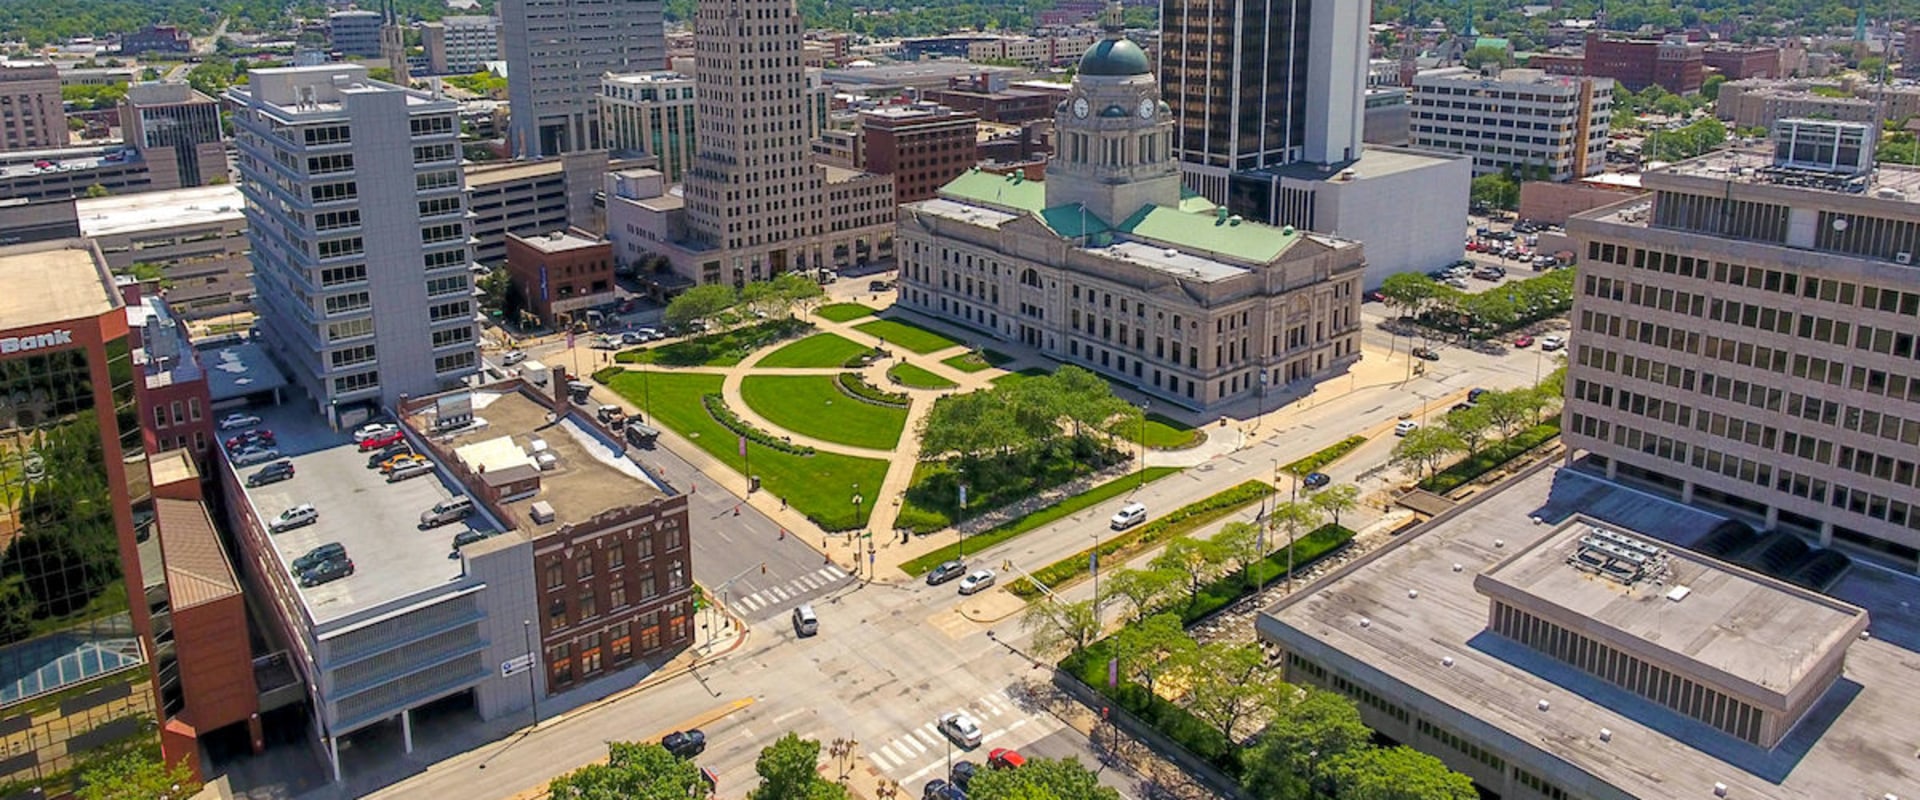 How large is fort wayne indiana?